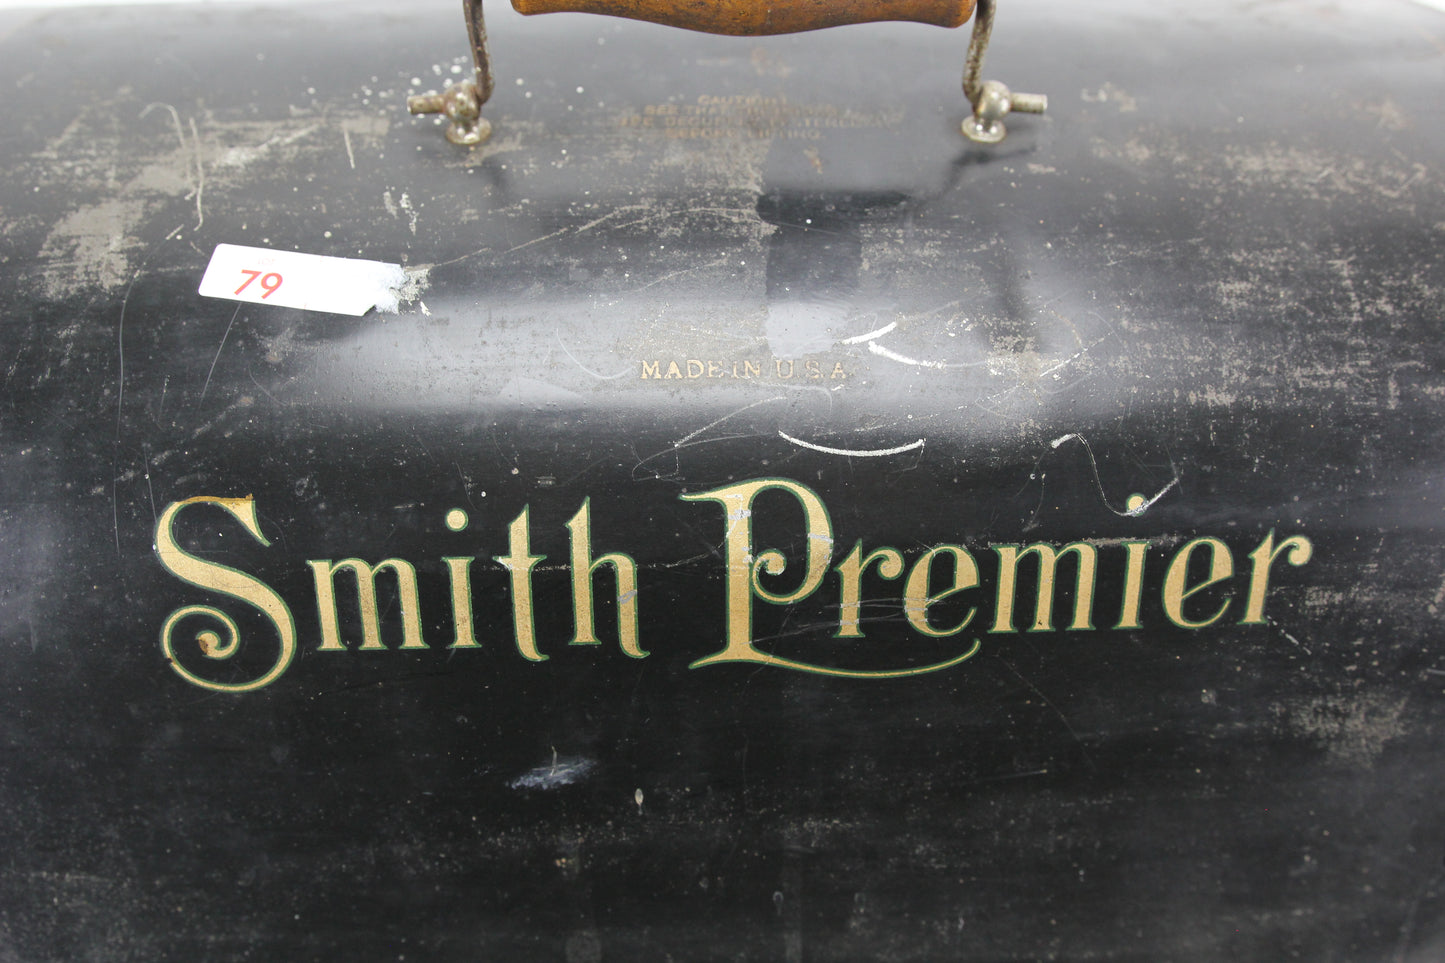 Smith Premier No. 5 Upright Typewriter with Case, Made in USA, 1902